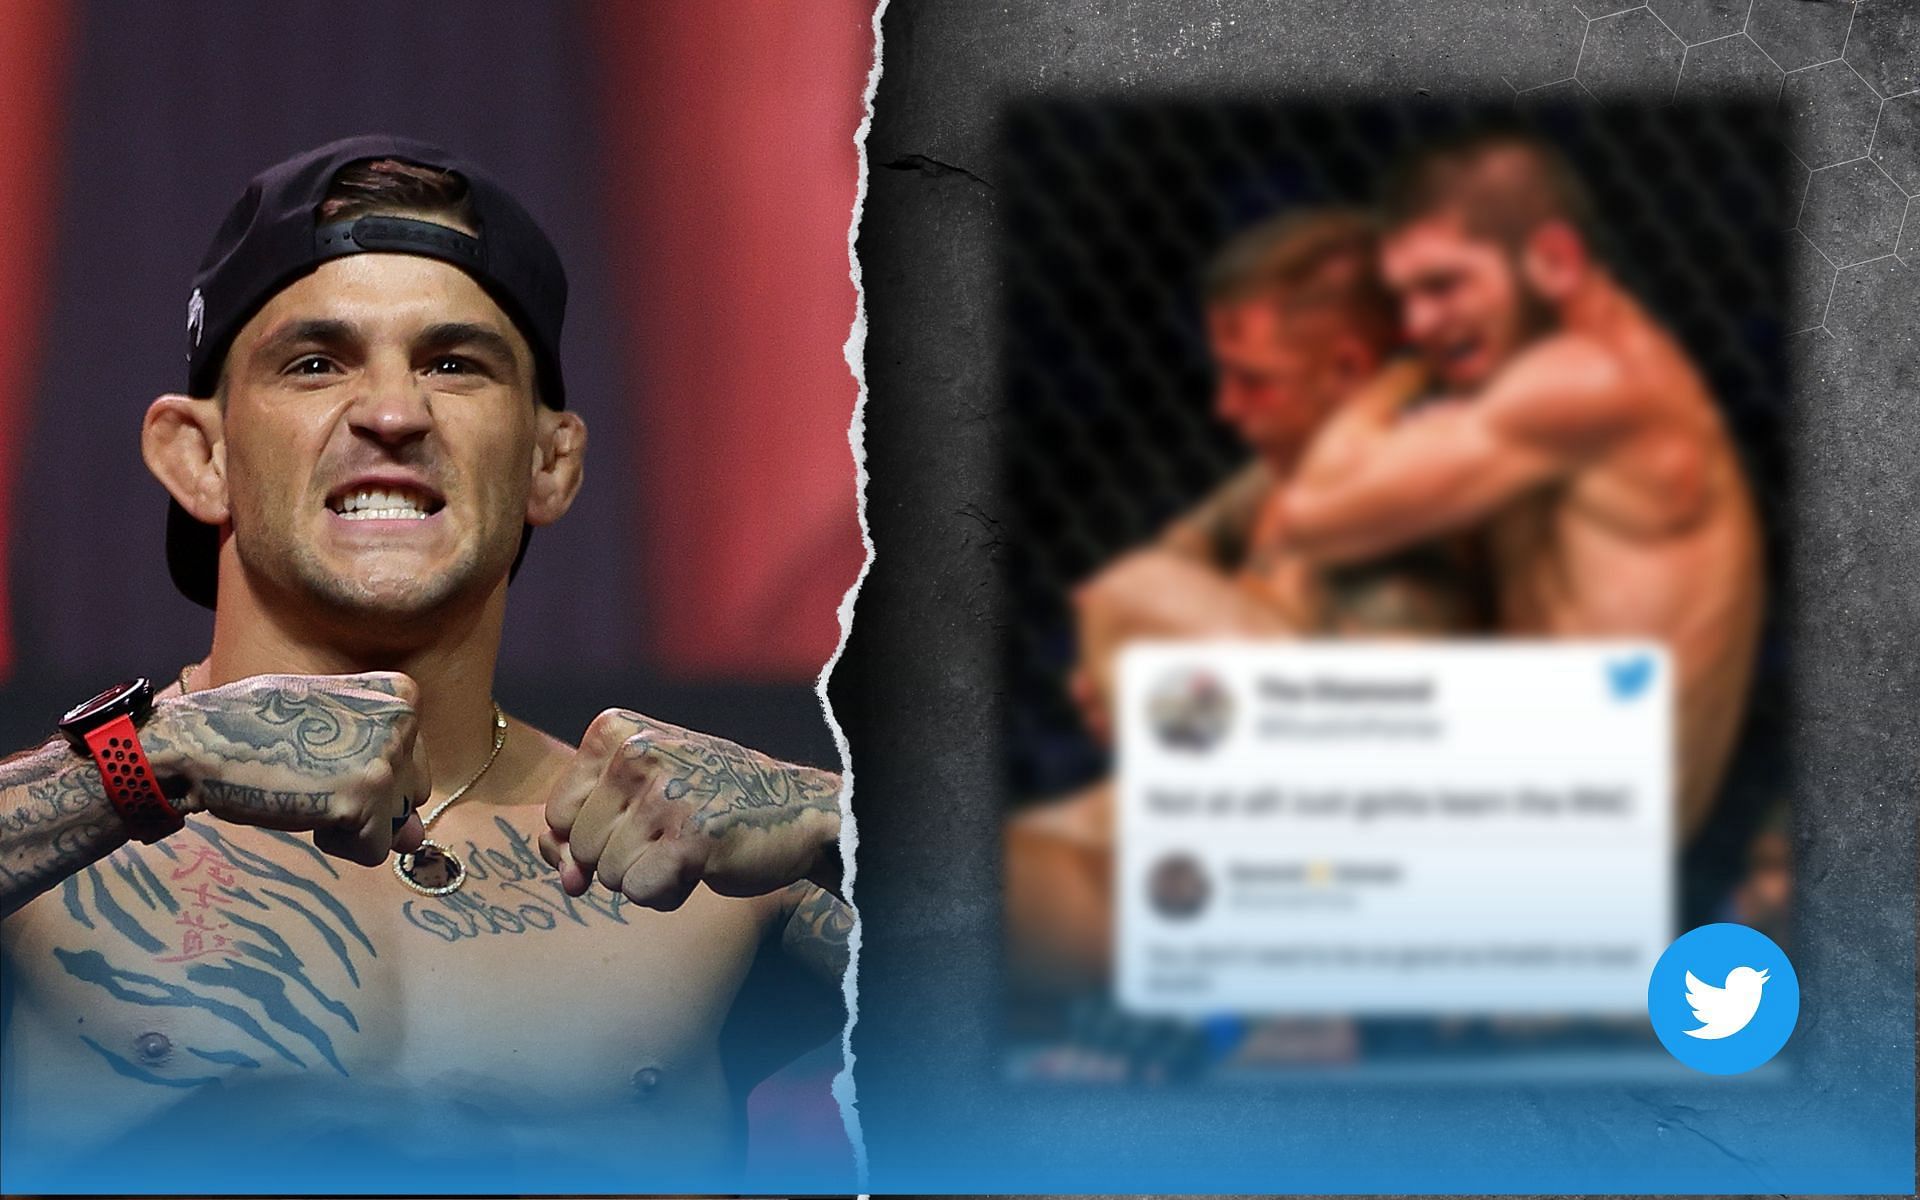 Dustin Poirier shares game plan to beat him in sarcastic response to online troll. [Image credits: @espnmma on Twitter]